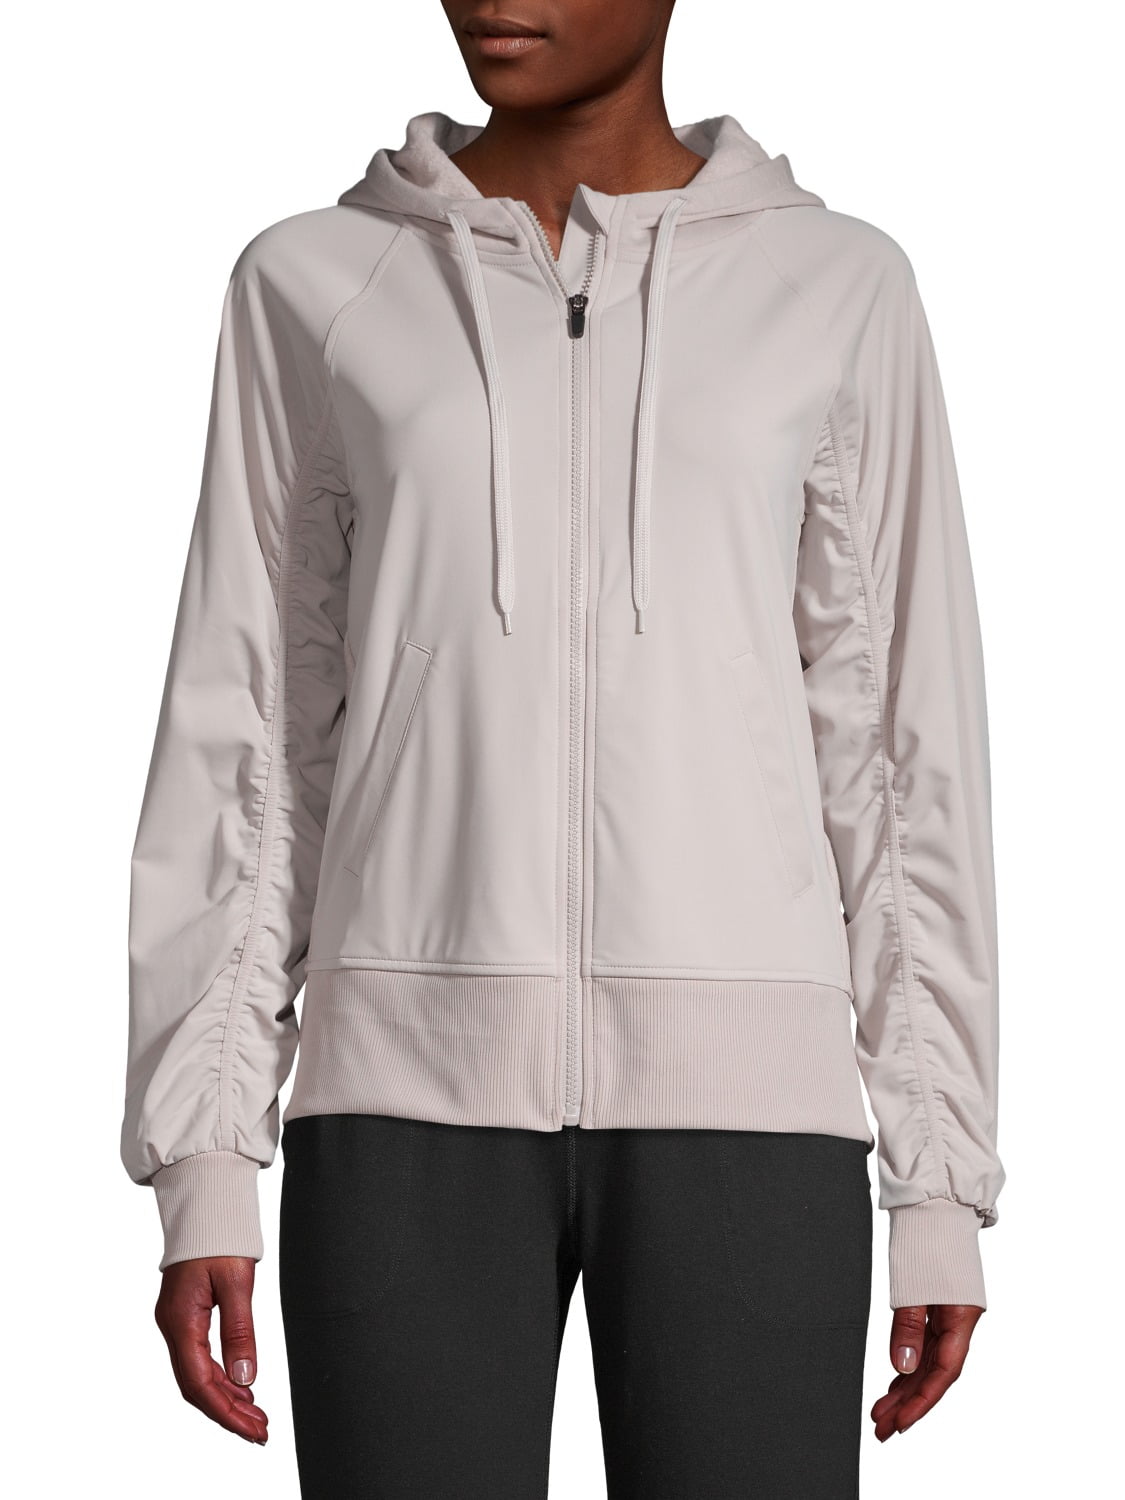 Athletic Works Women's Athleisure Zip Front Hooded Jacket with Shirred ...